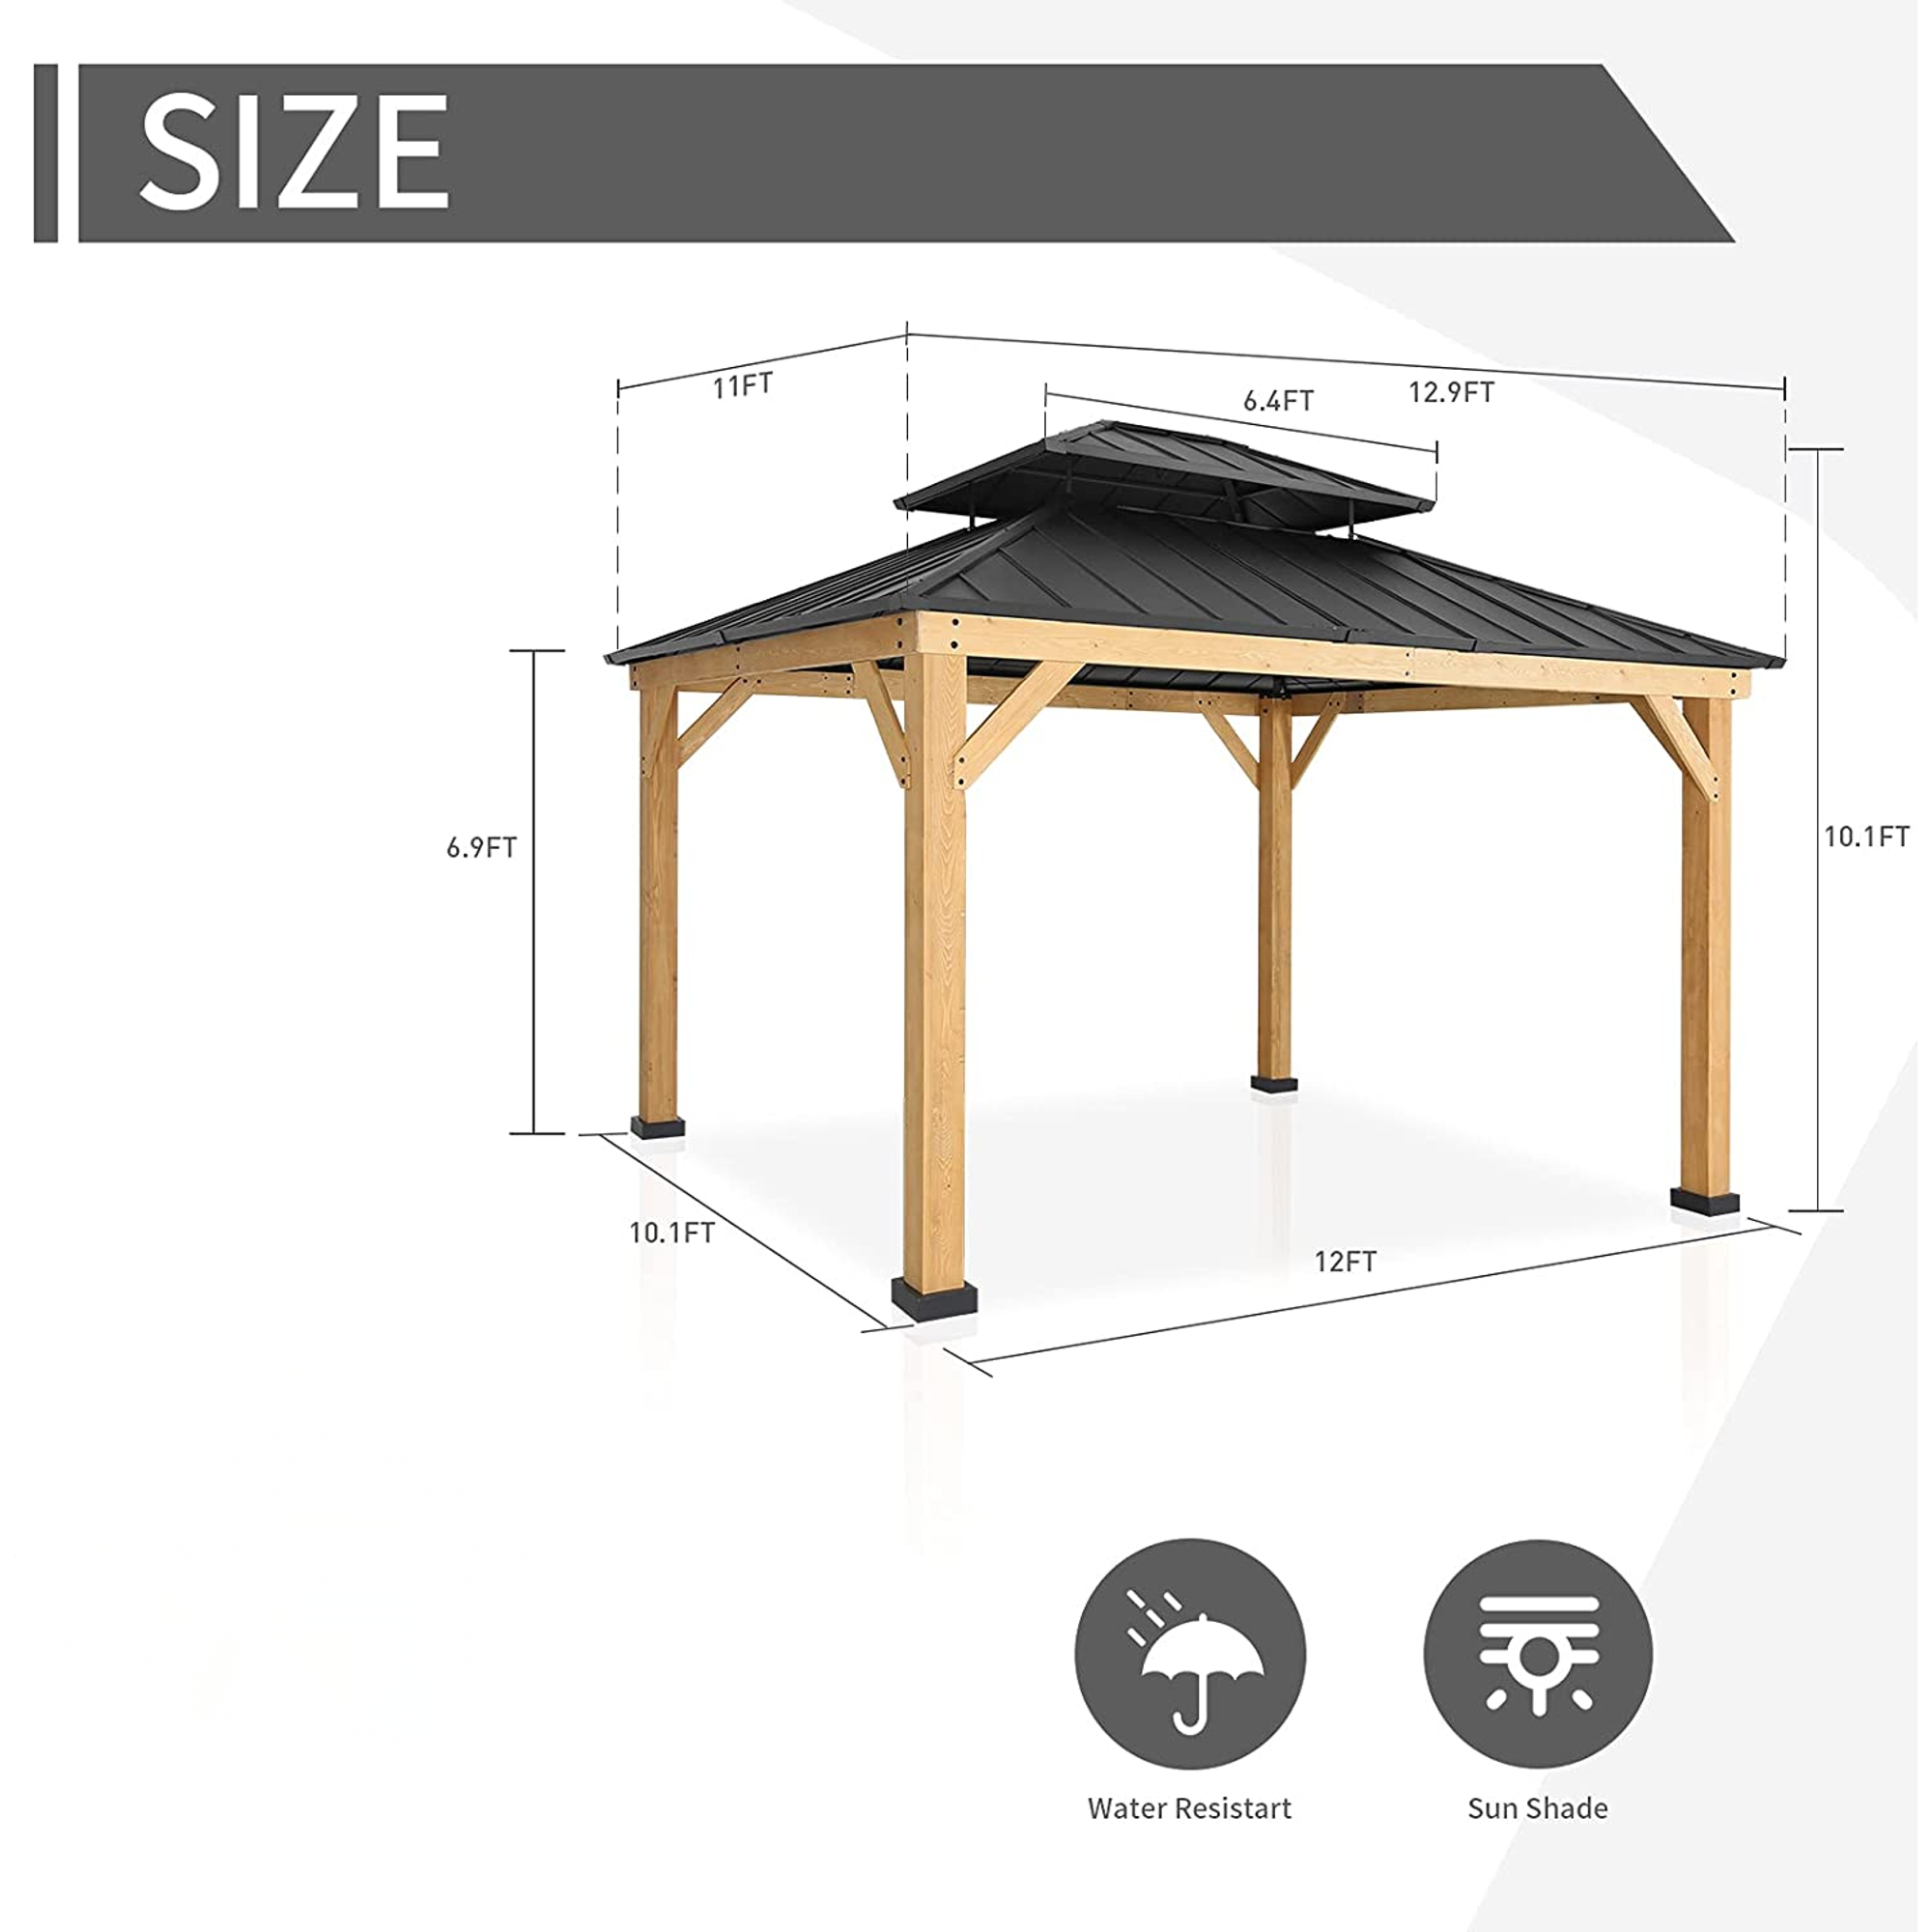 Richryce 13' x 11' Hardtop Wooden Gazebo,Double Roof Patio Gazebo with Cedar Wood Frame & Galvanized Steel Top, All-Weather r for Garden, Patio, Lawns - image 3 of 6